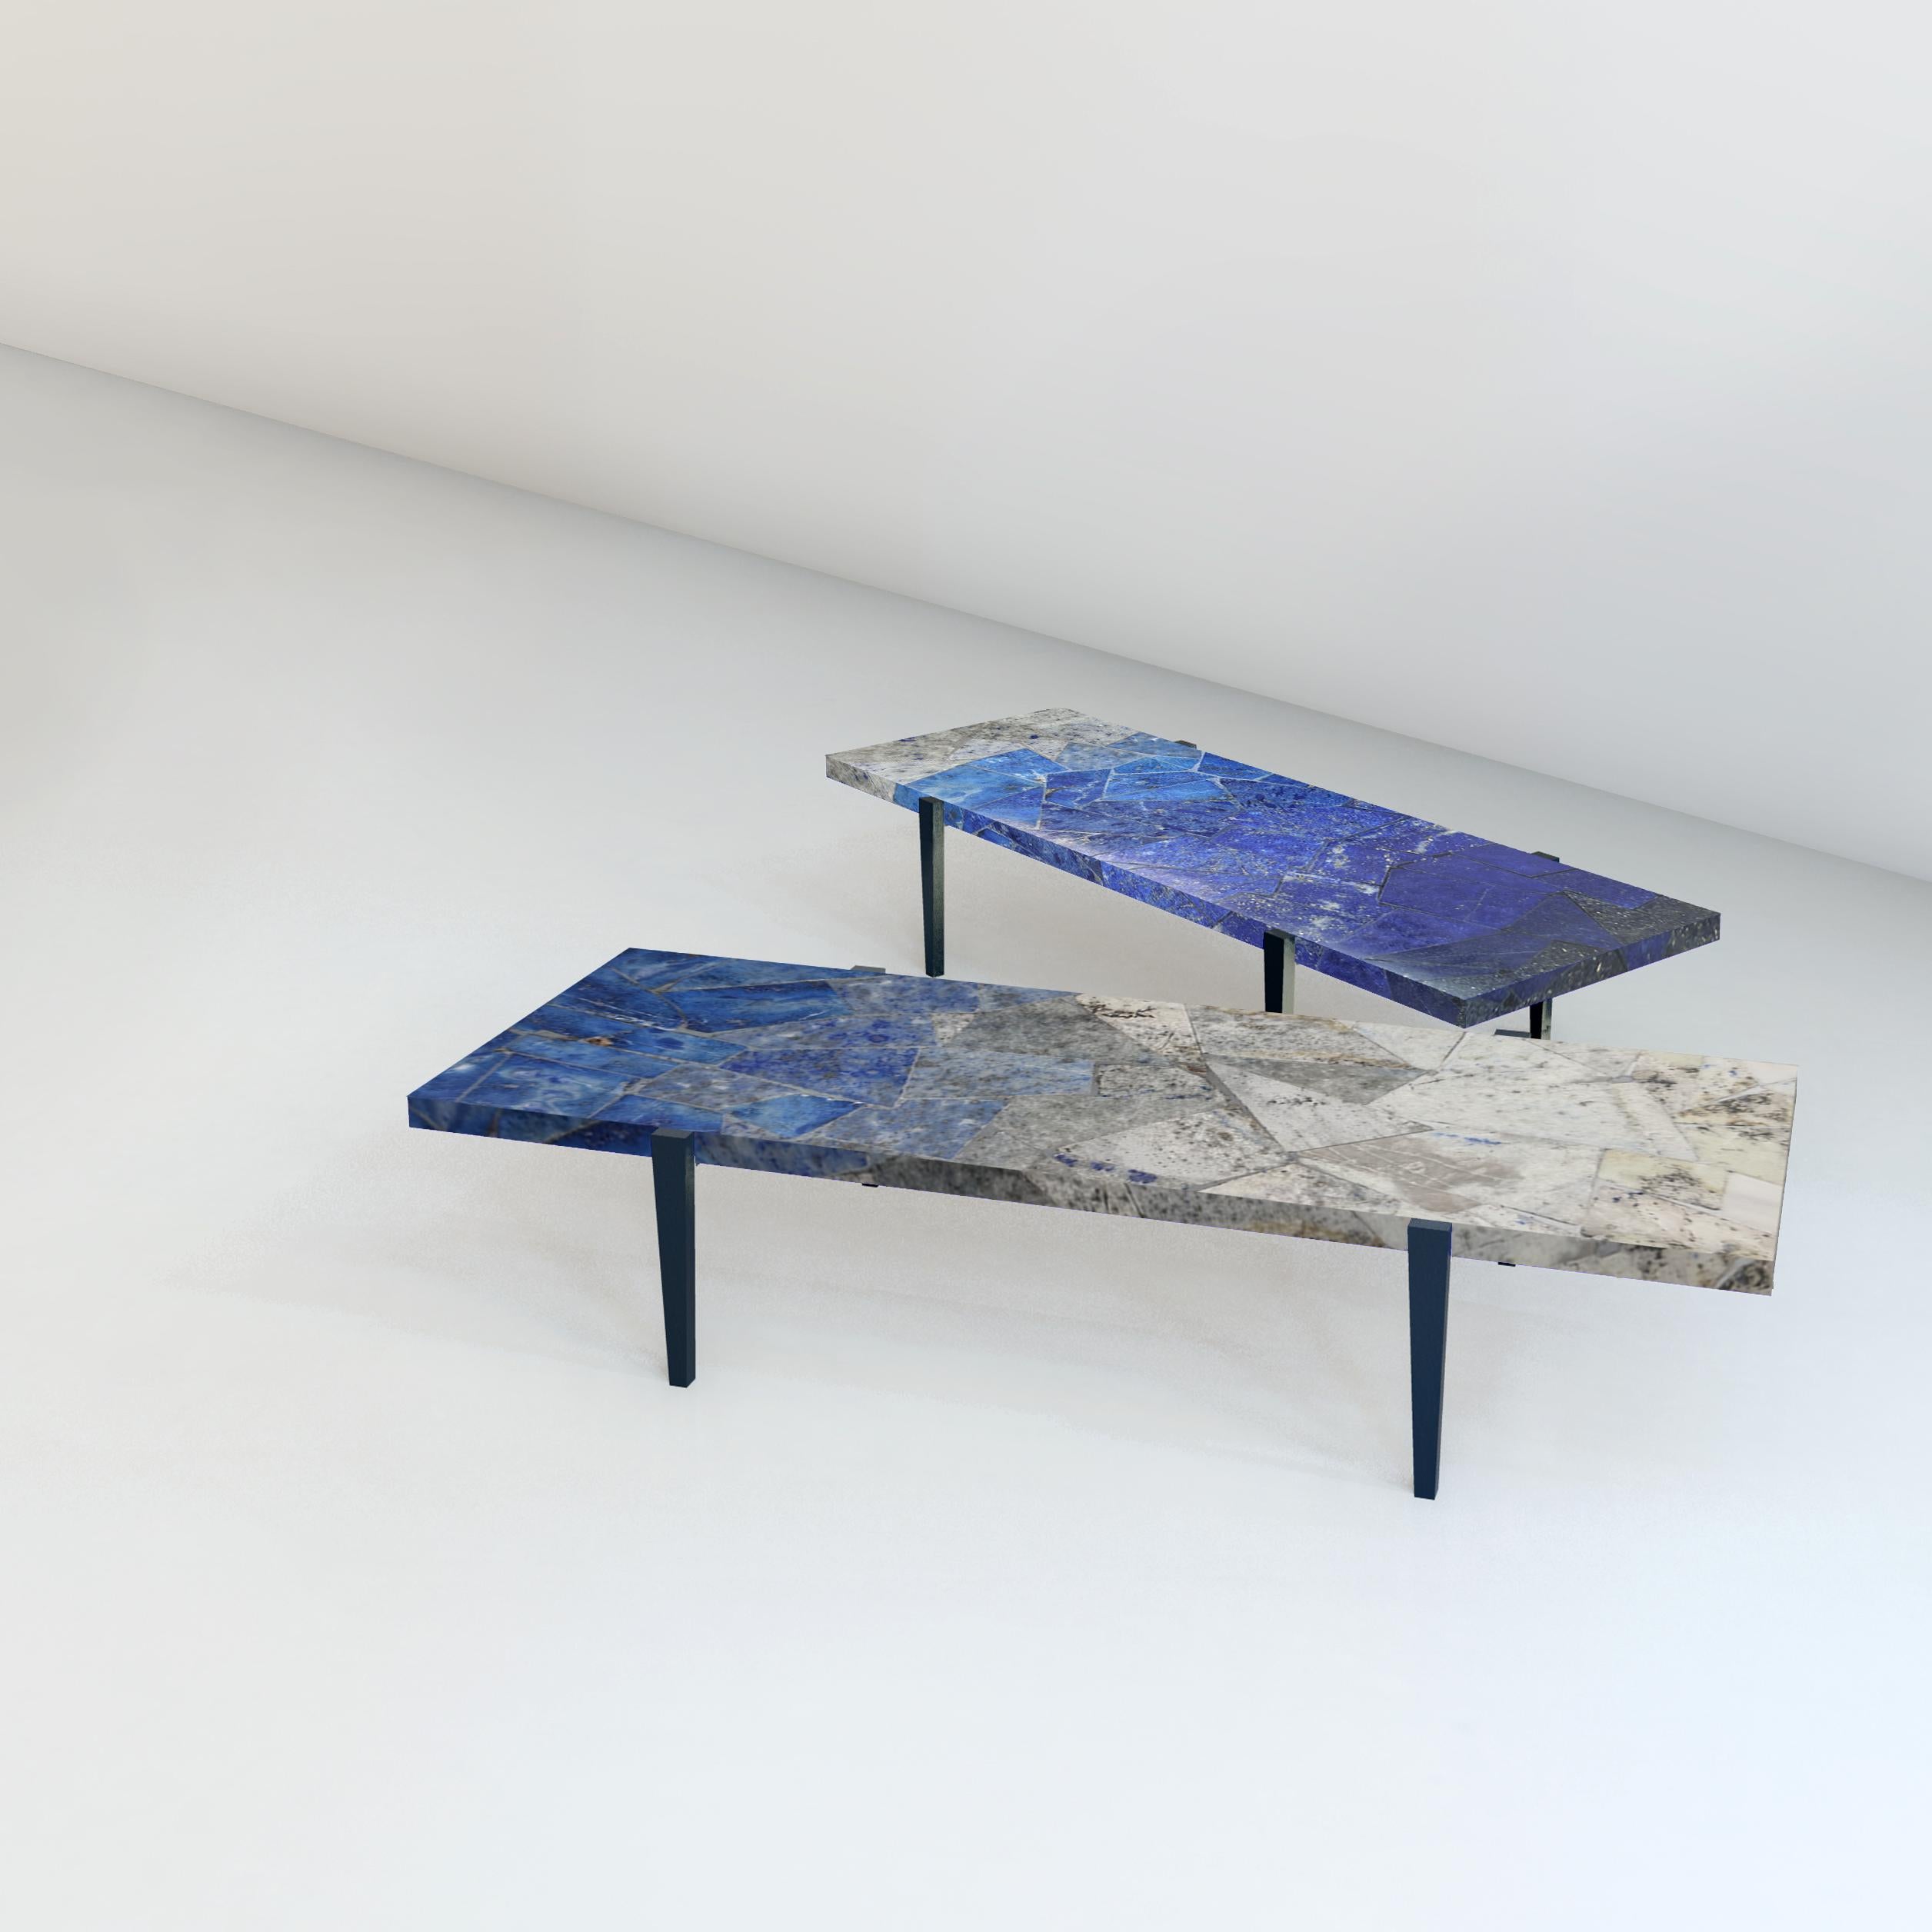 Set of 2, Topaa'nga I and II tables by Studio Lel
Dimensions: W 183 x D 61 x H 35.5 cm
Materials: Lapis Lazuli, granite, metal

These are handmade from semiprecious stone and marble in a small artisanal workshop. Please note that variations and